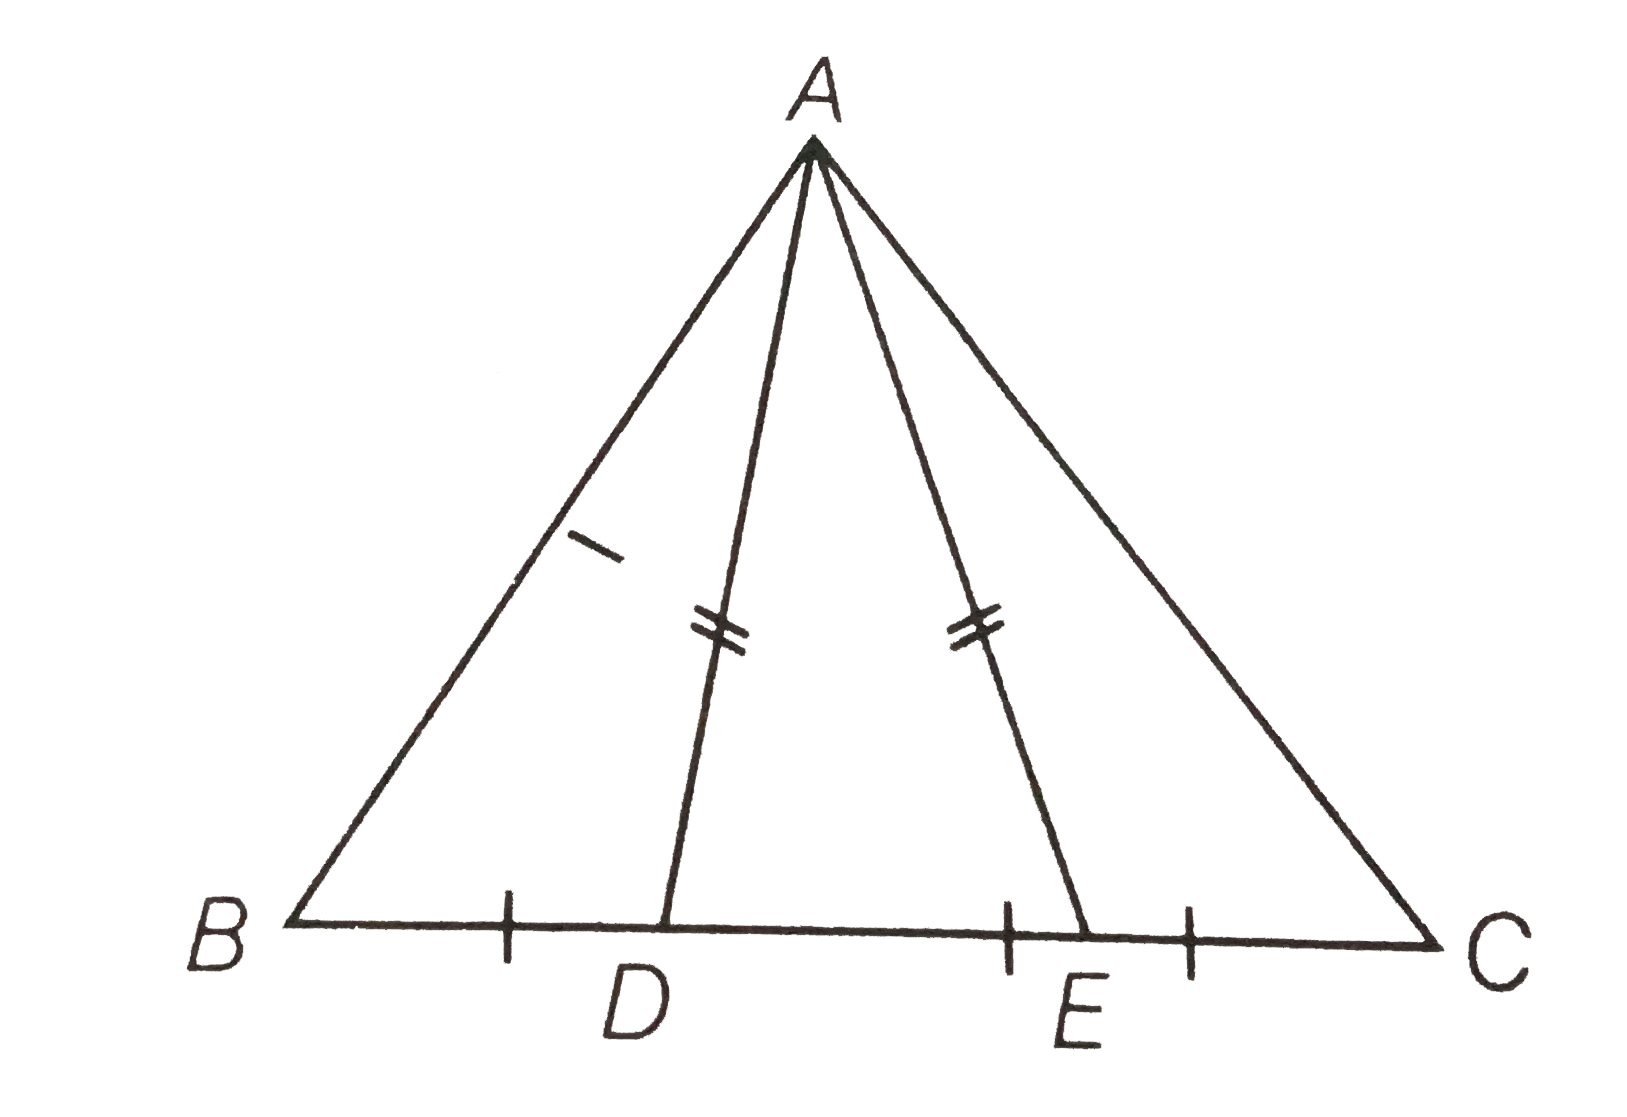 In figure ,D and E are Points on side BC of a Delta ABC such that BD=CE and AD=AE.Show that Delta ABD cong Delta ACE.